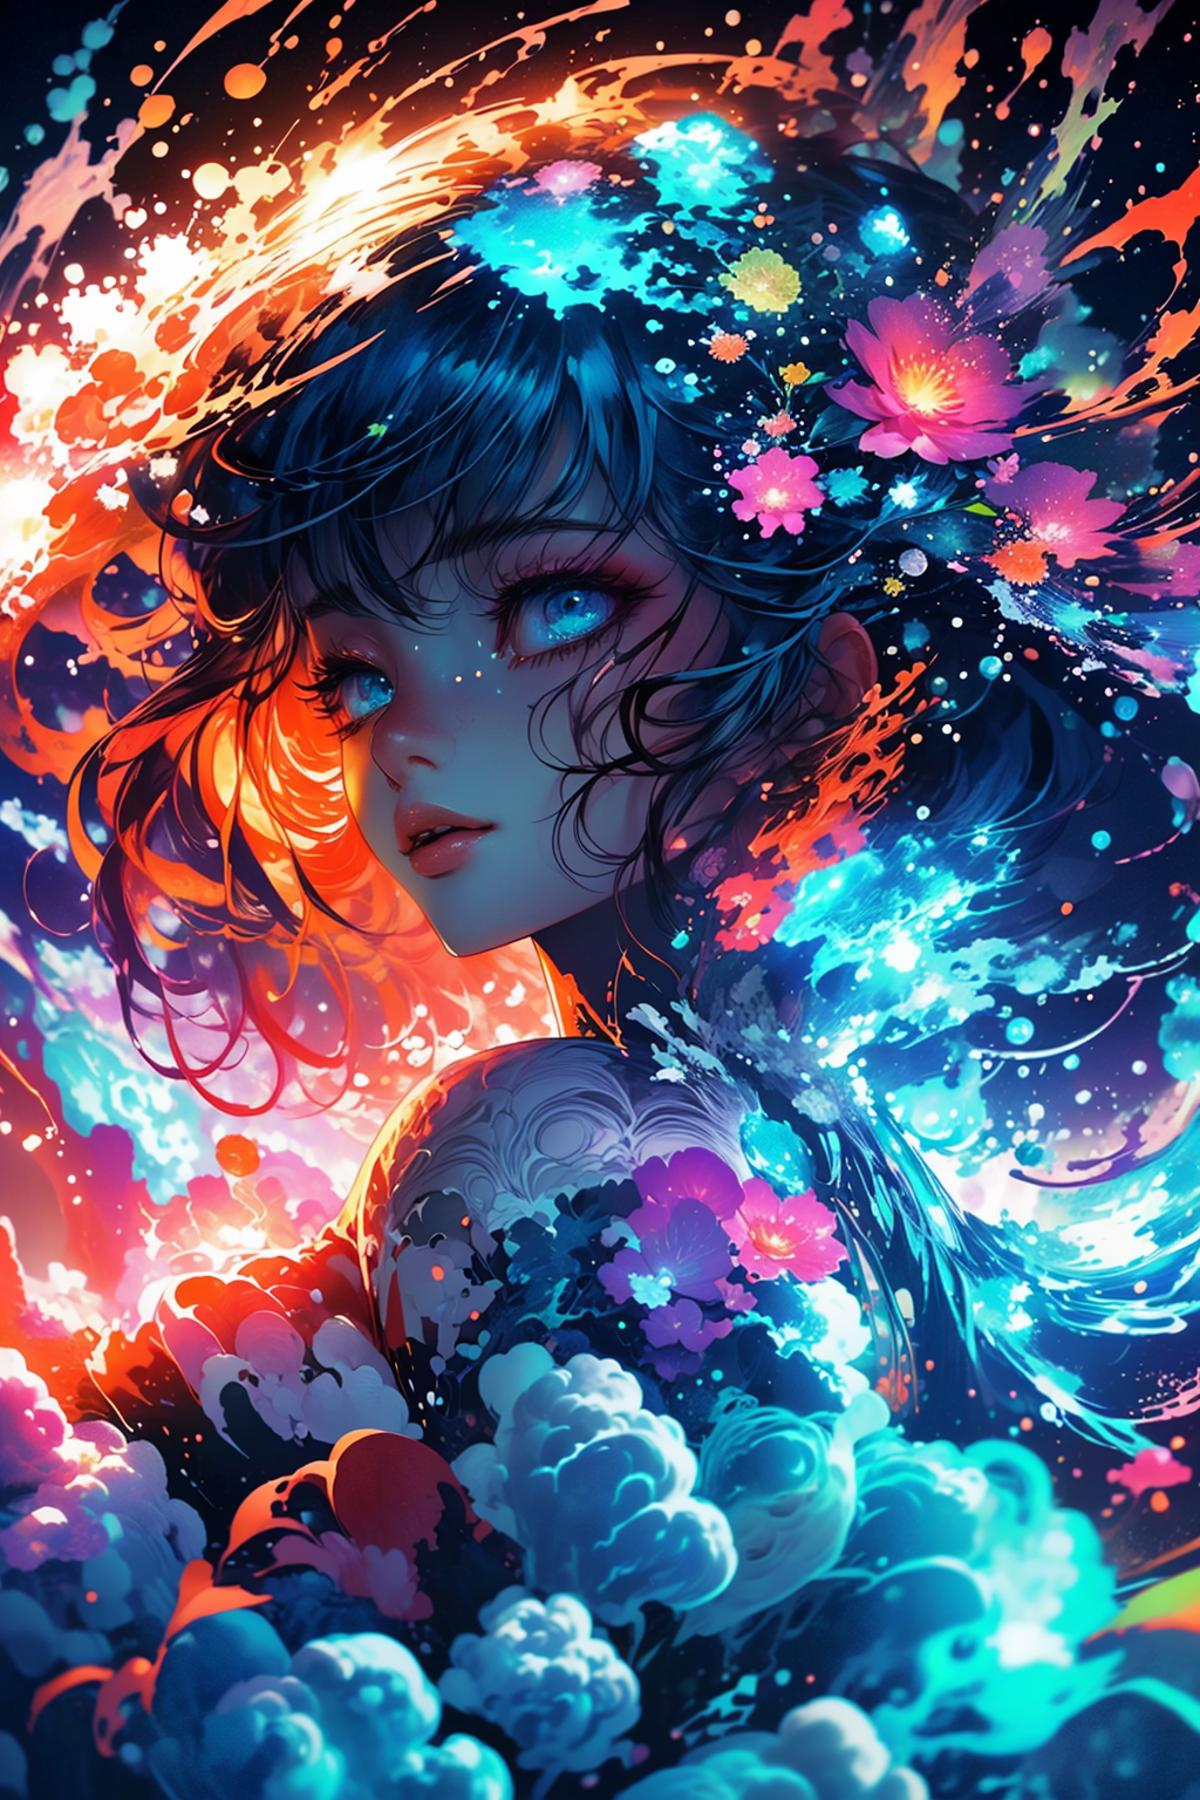 Anime-style girl with blue eyes and purple hair, surrounded by colorful flowers and clouds in a fantasy setting.